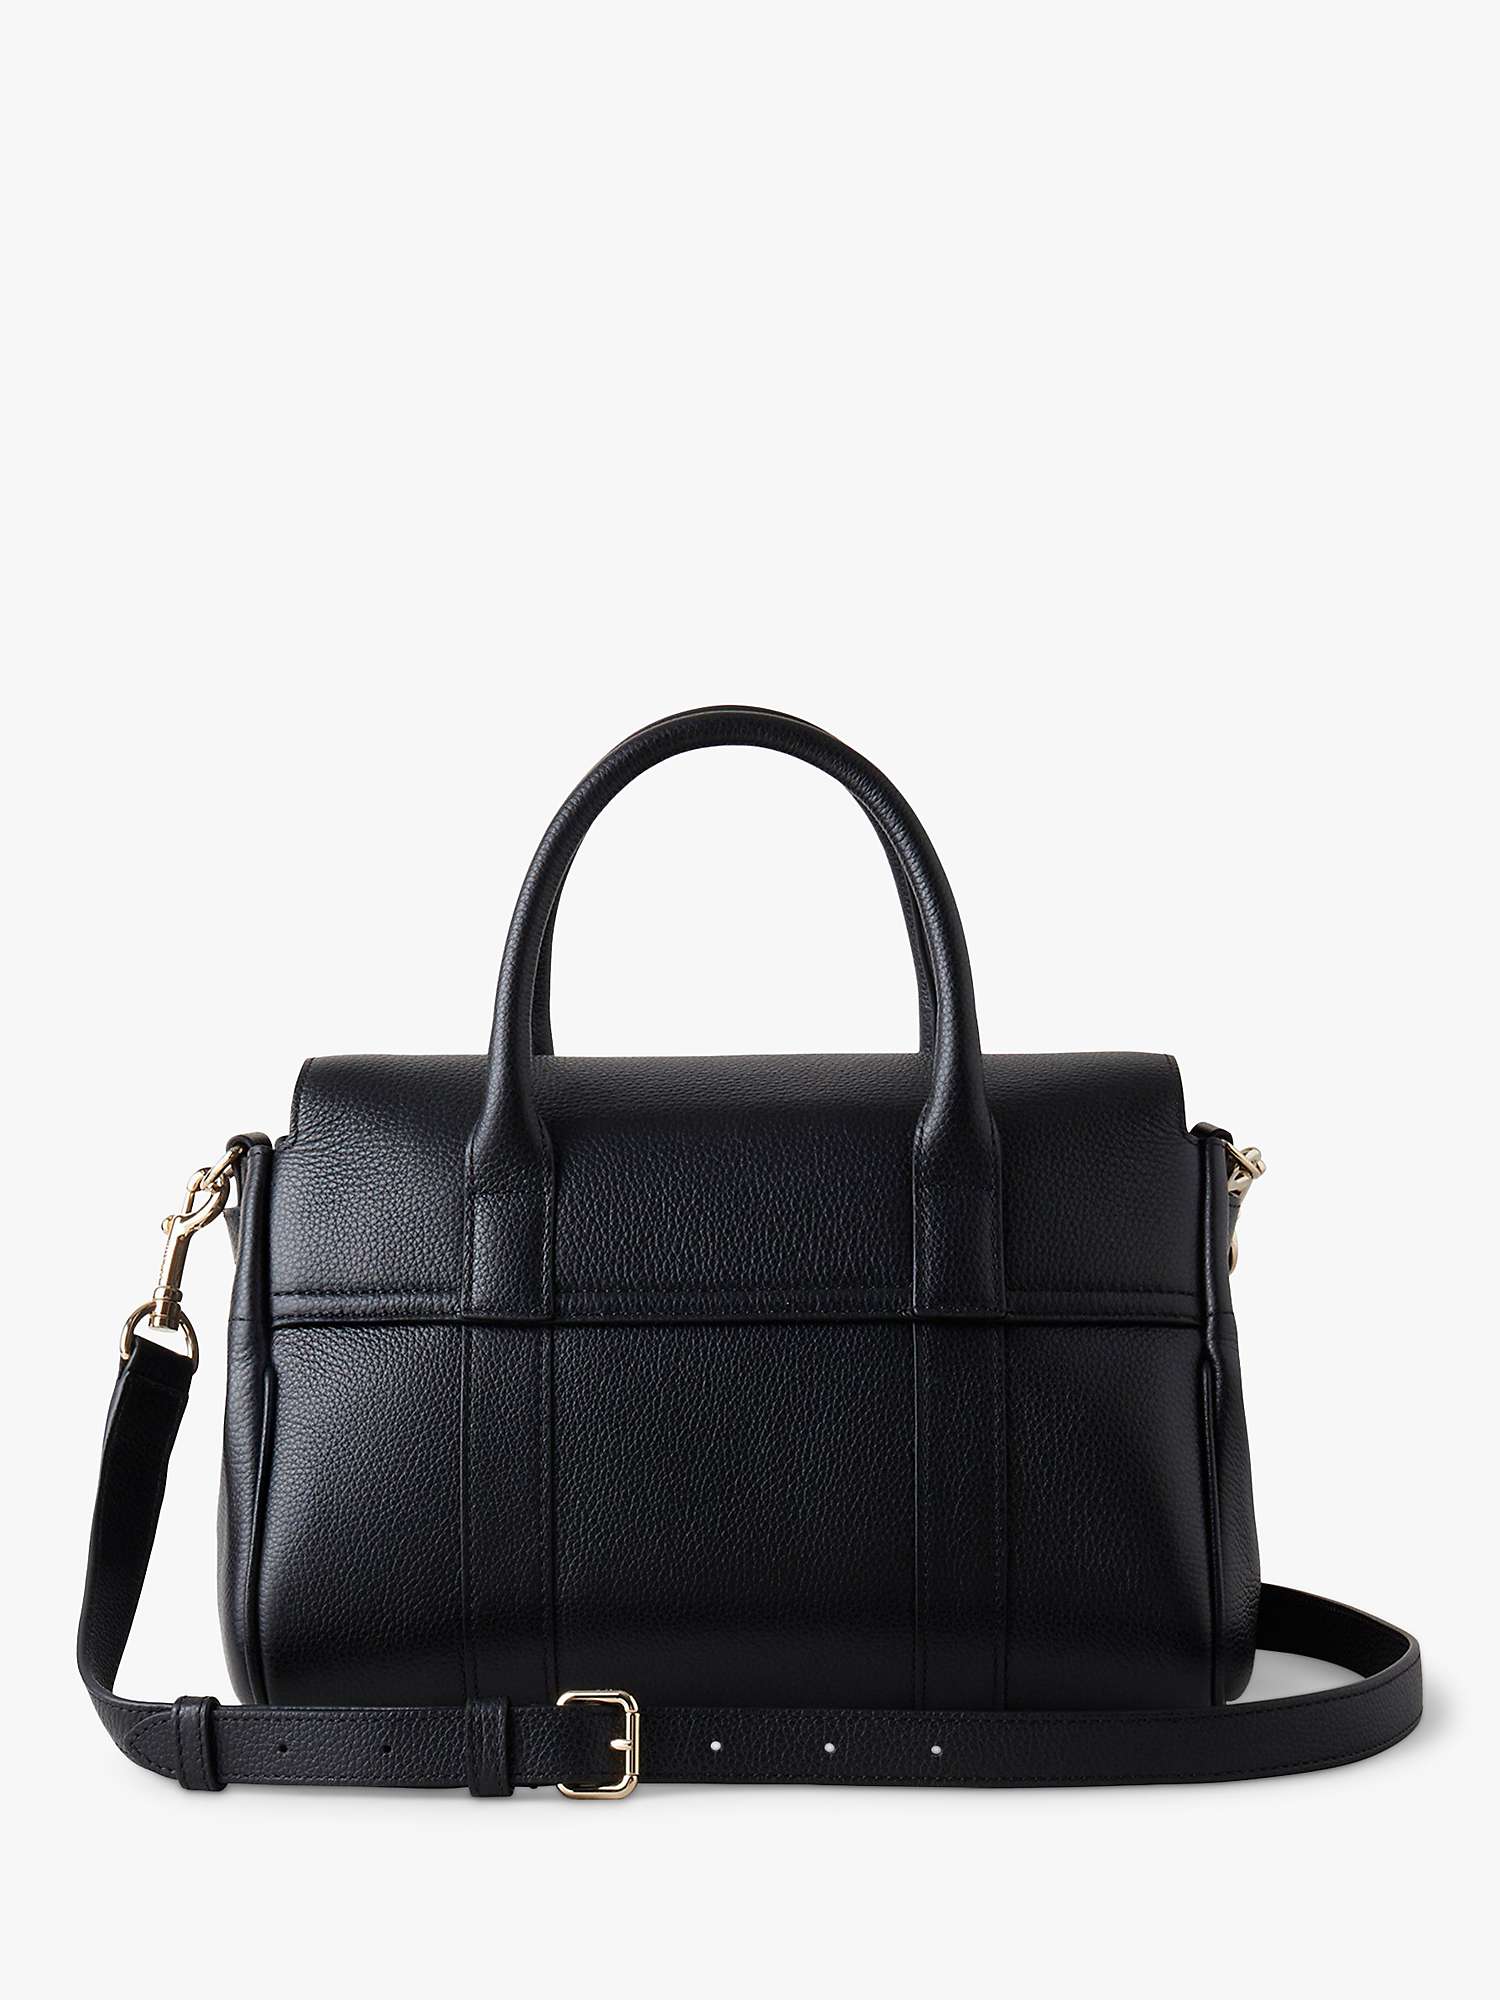 Buy Mulberry Bayswater Small Classic Grain Leather Satchel, Black Online at johnlewis.com